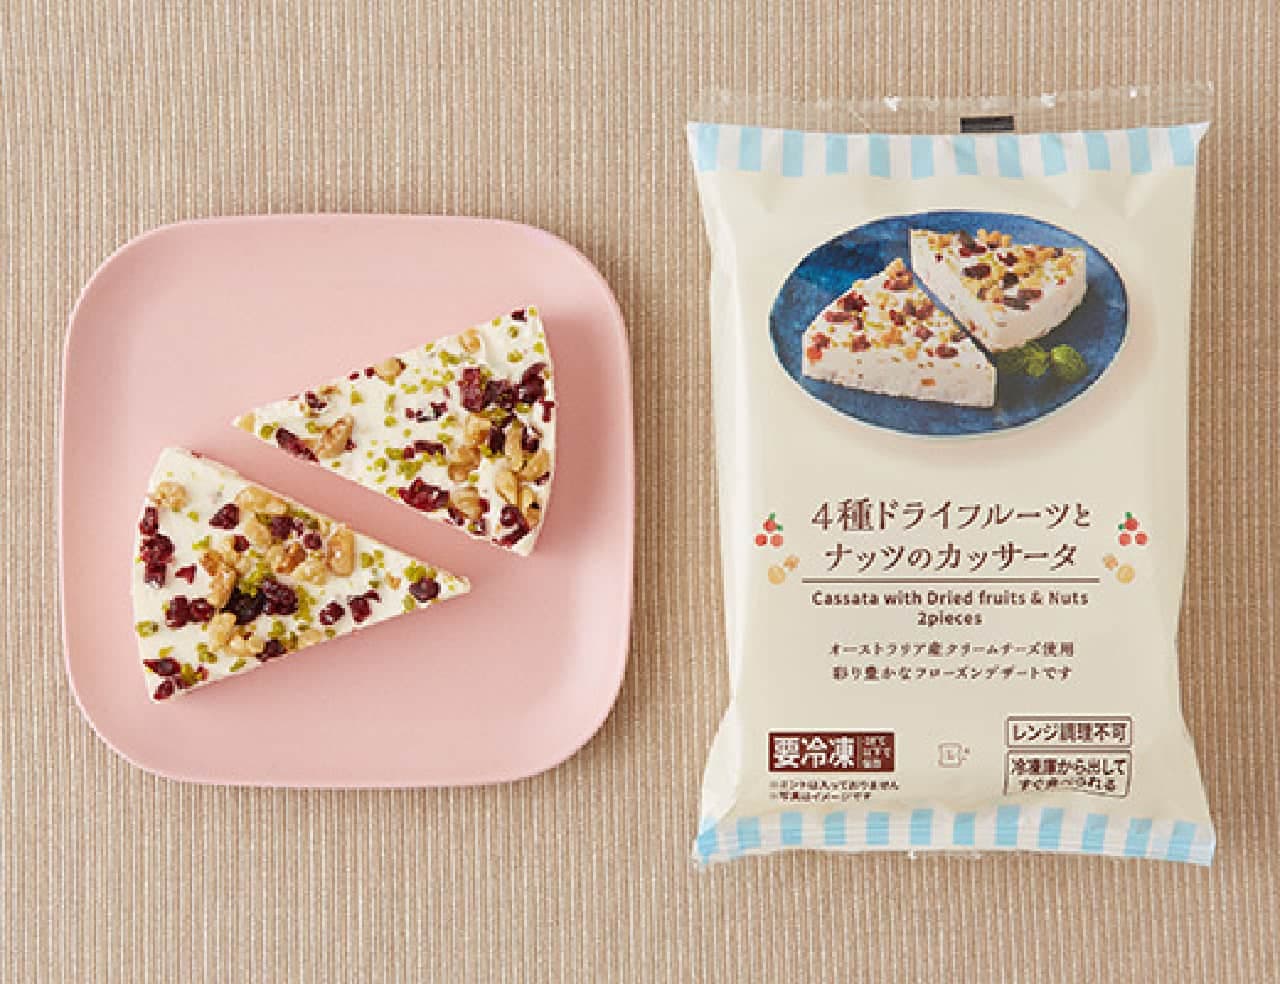 Lawson "Cassata with 4 kinds of dried fruits and nuts